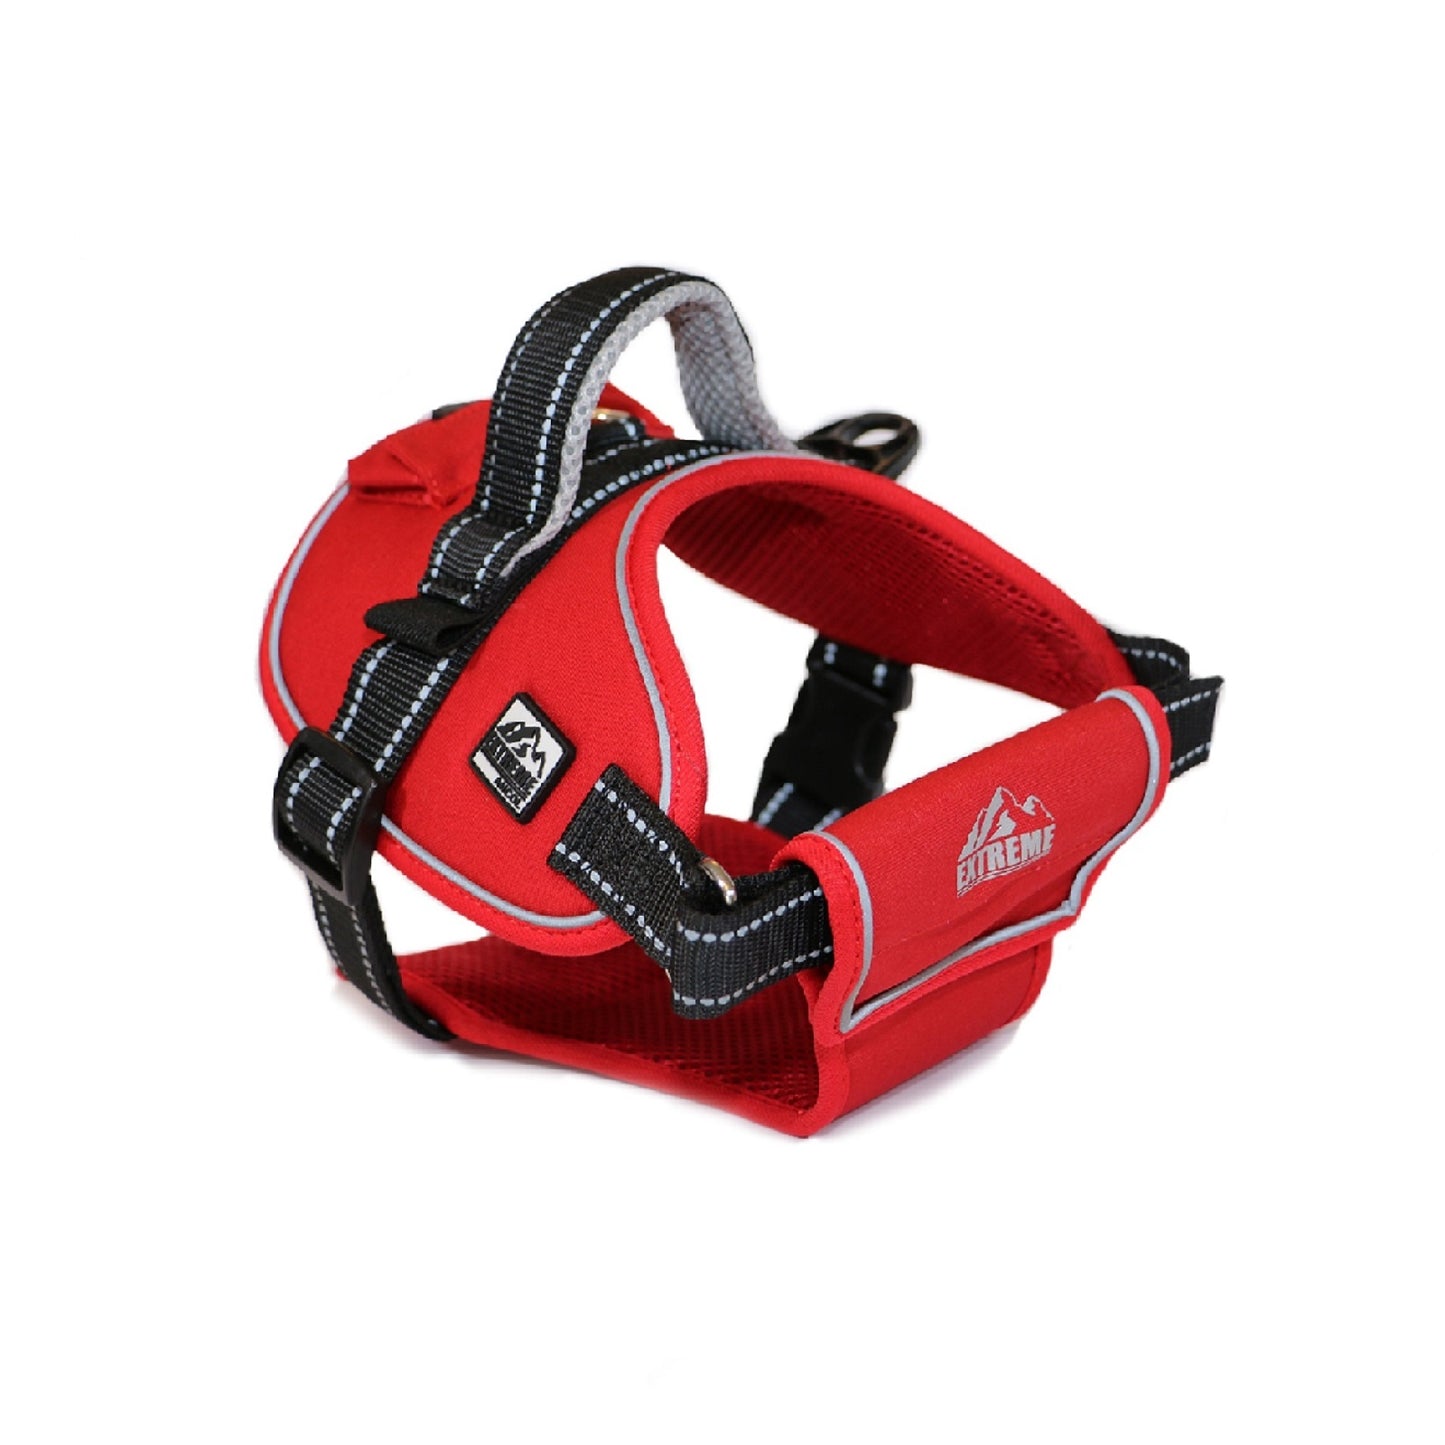 Ancol - Extreme Dog Harness